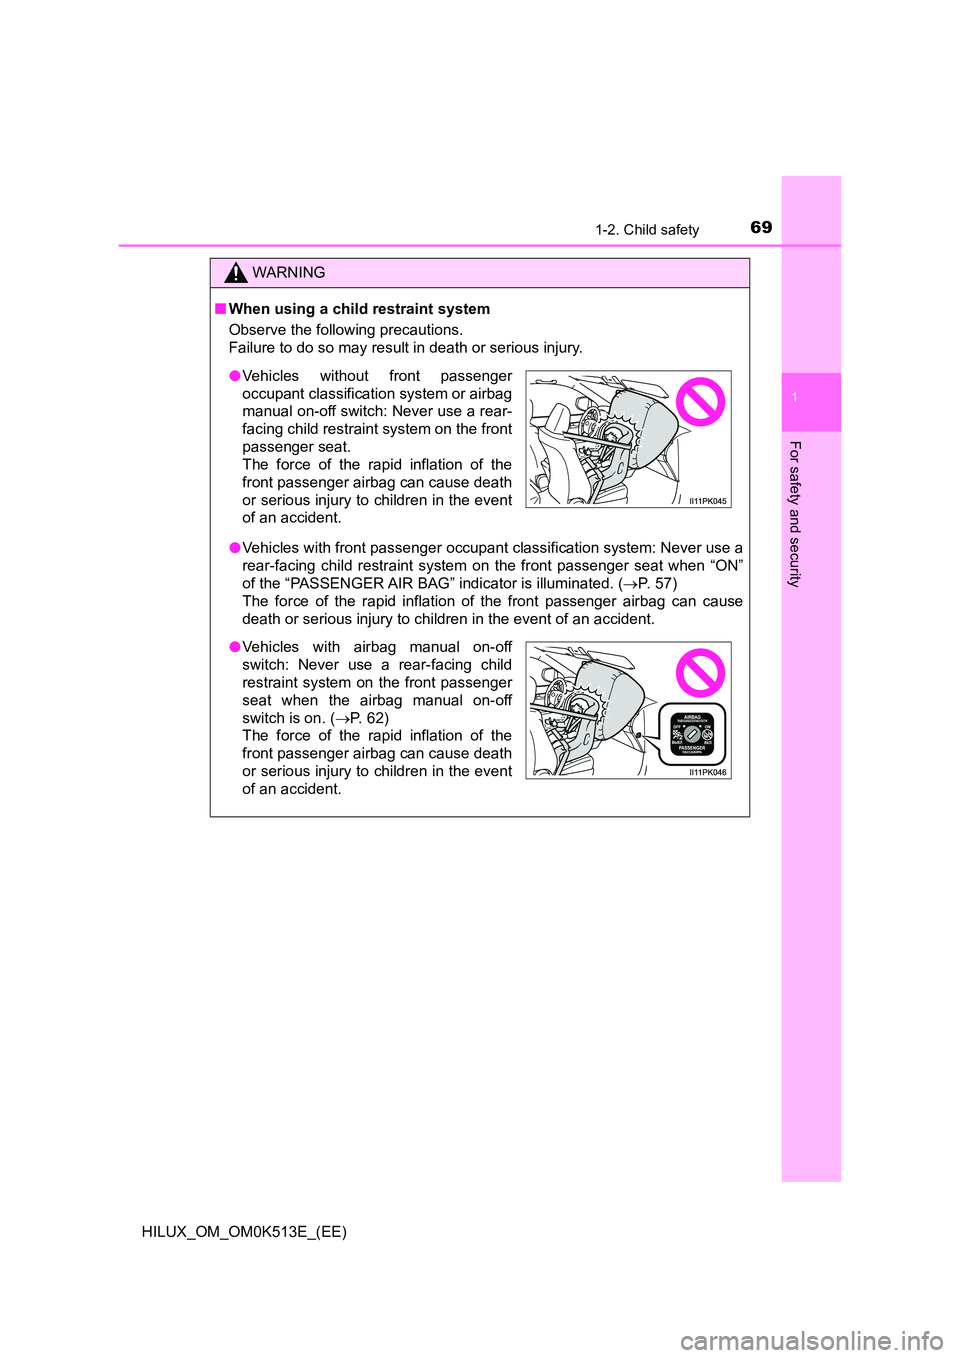 TOYOTA HILUX 2021  Owners Manual (in English) 691-2. Child safety
1
HILUX_OM_OM0K513E_(EE)
For safety and security
WARNING
�QWhen using a child restraint system 
Observe the following precautions. 
Failure to do so may result in death or serious 